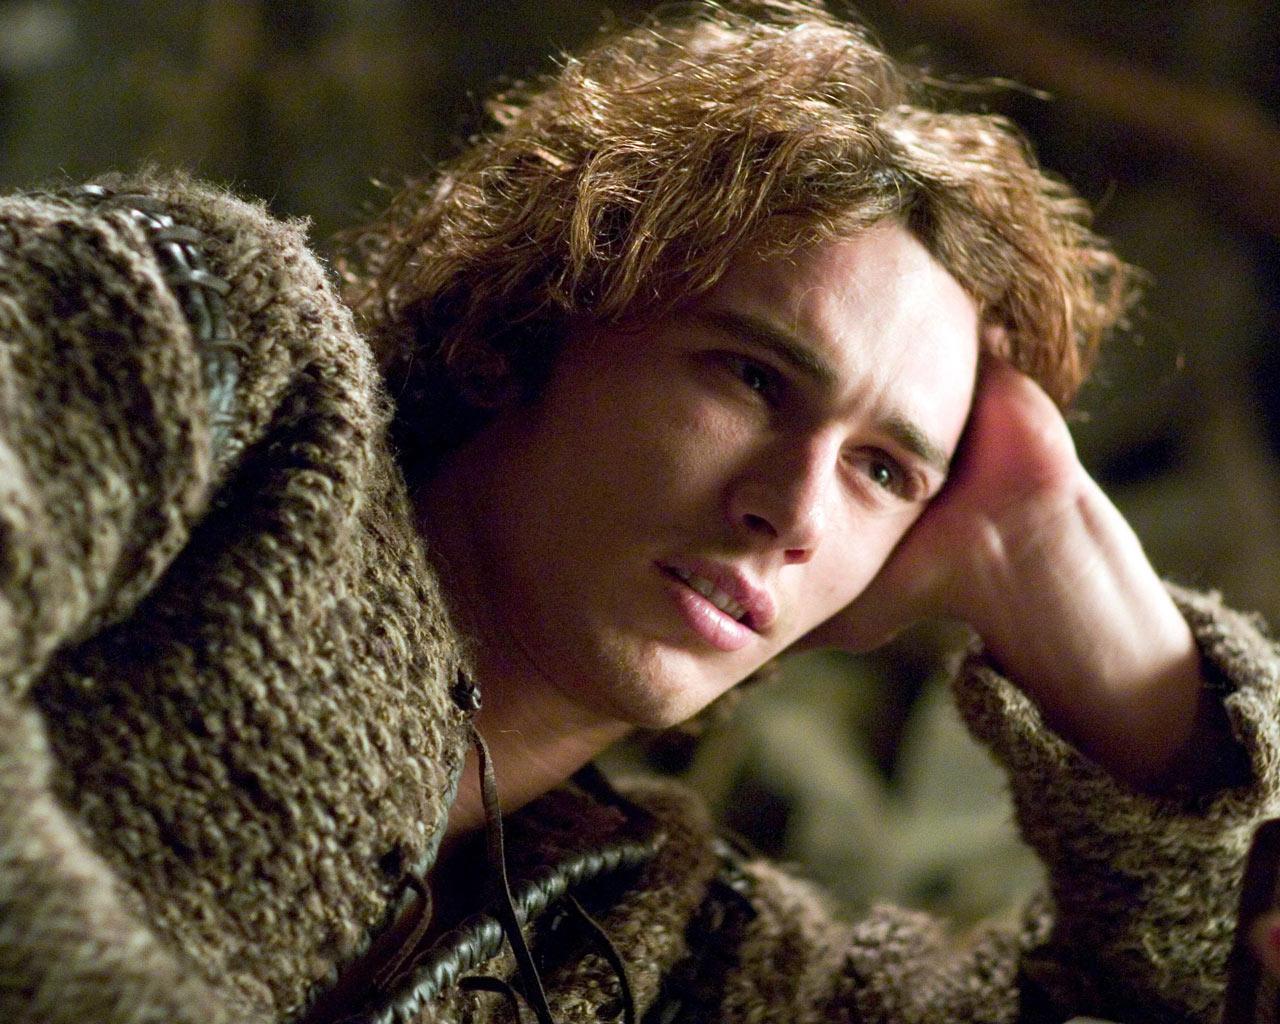 James Franco - Tristan and Isolde Wallpaper #1 1280 x 1024 